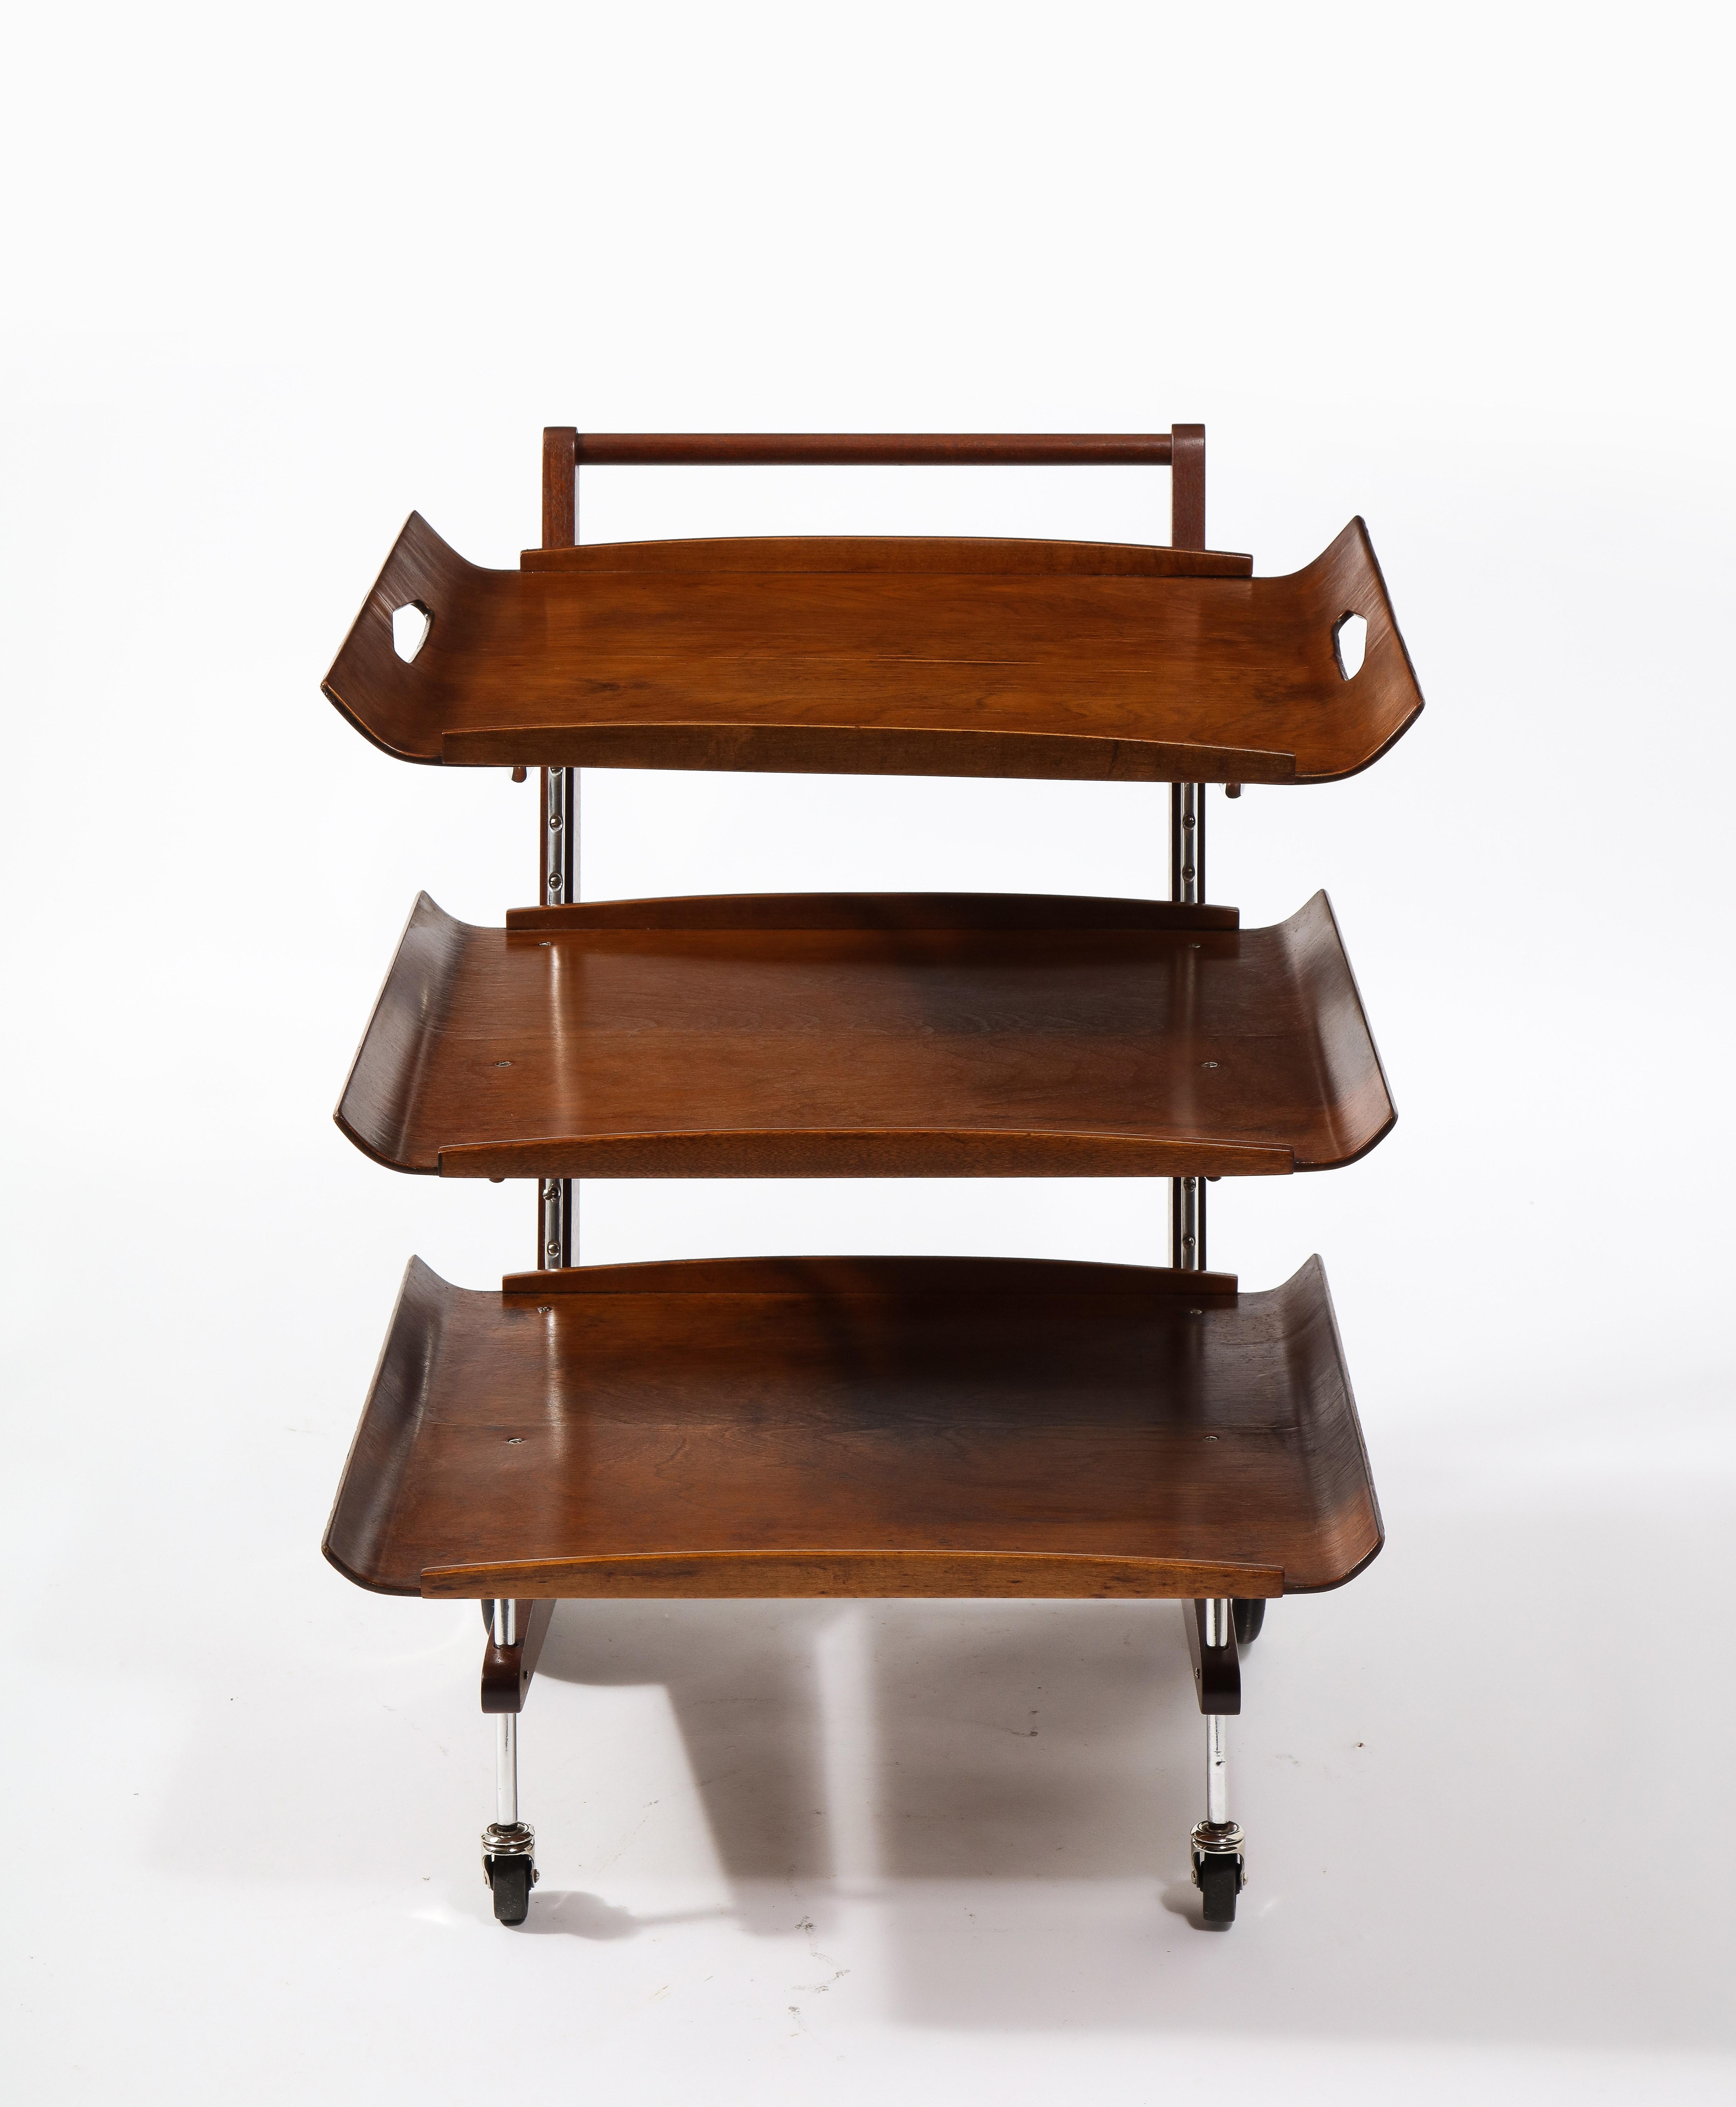 Modernist Tiered Magazine Rack on Wheels or Bar Cart, USA 1950's For Sale 12